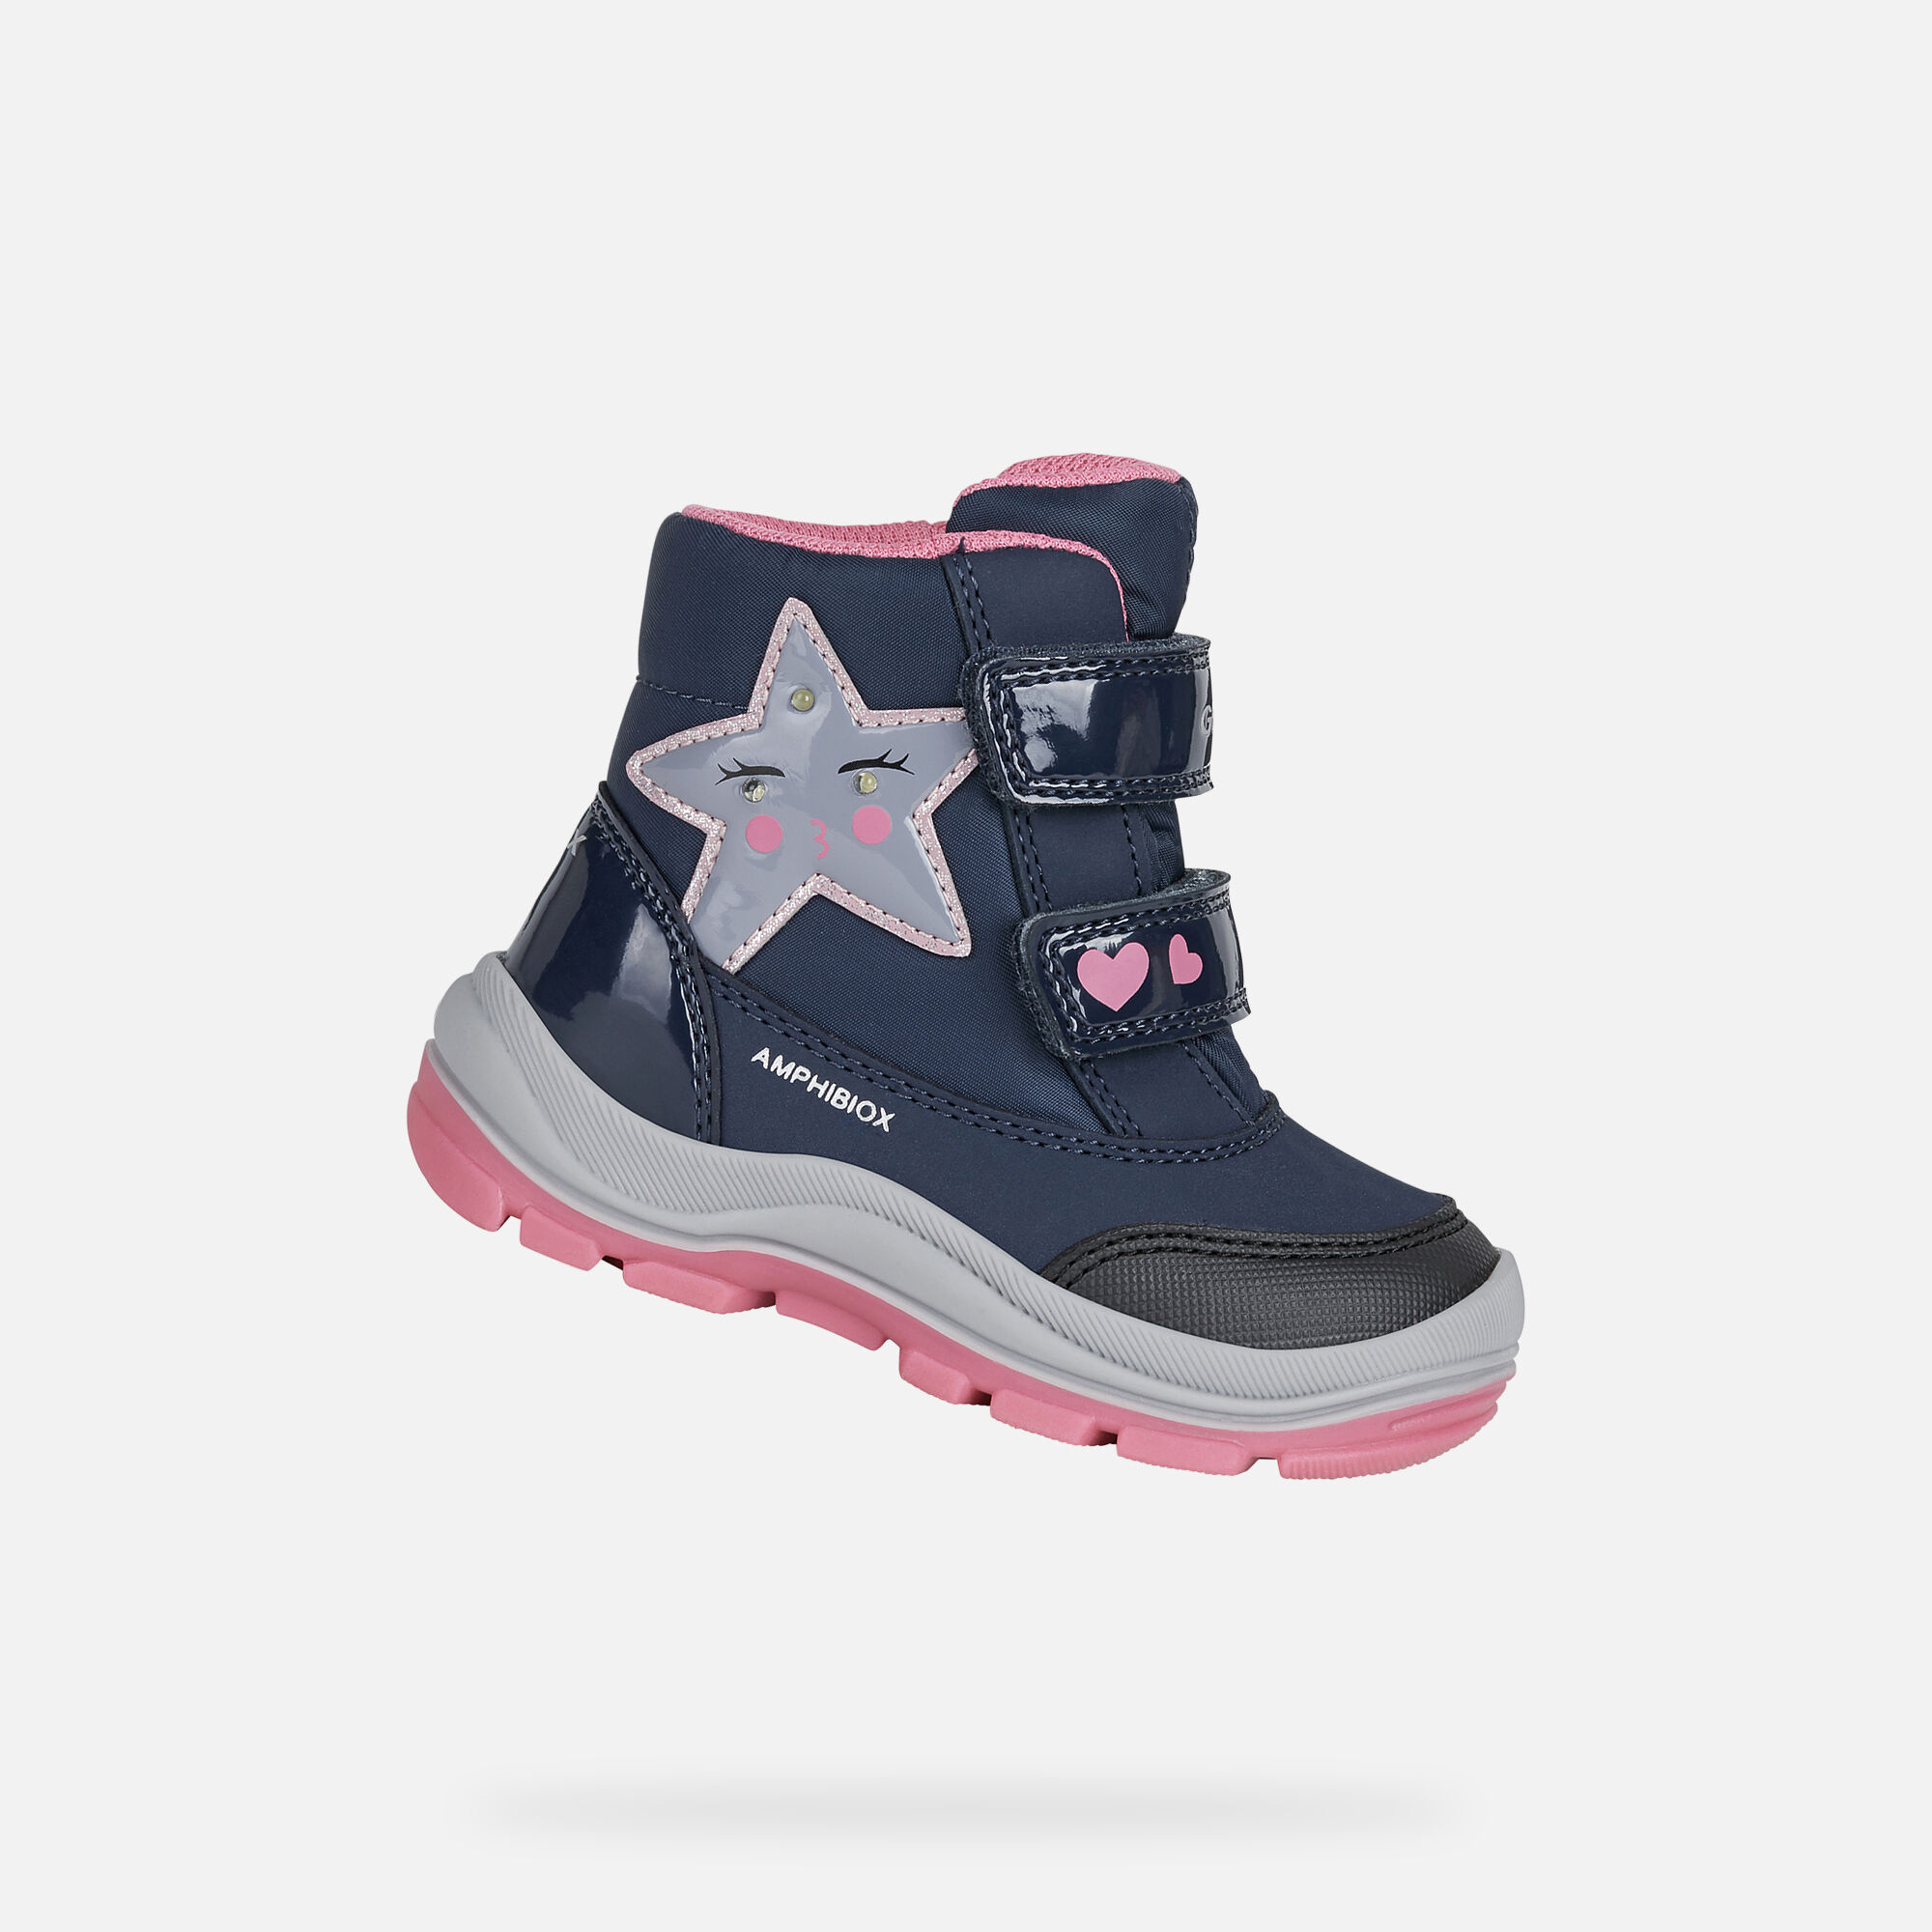 geox childrens boots